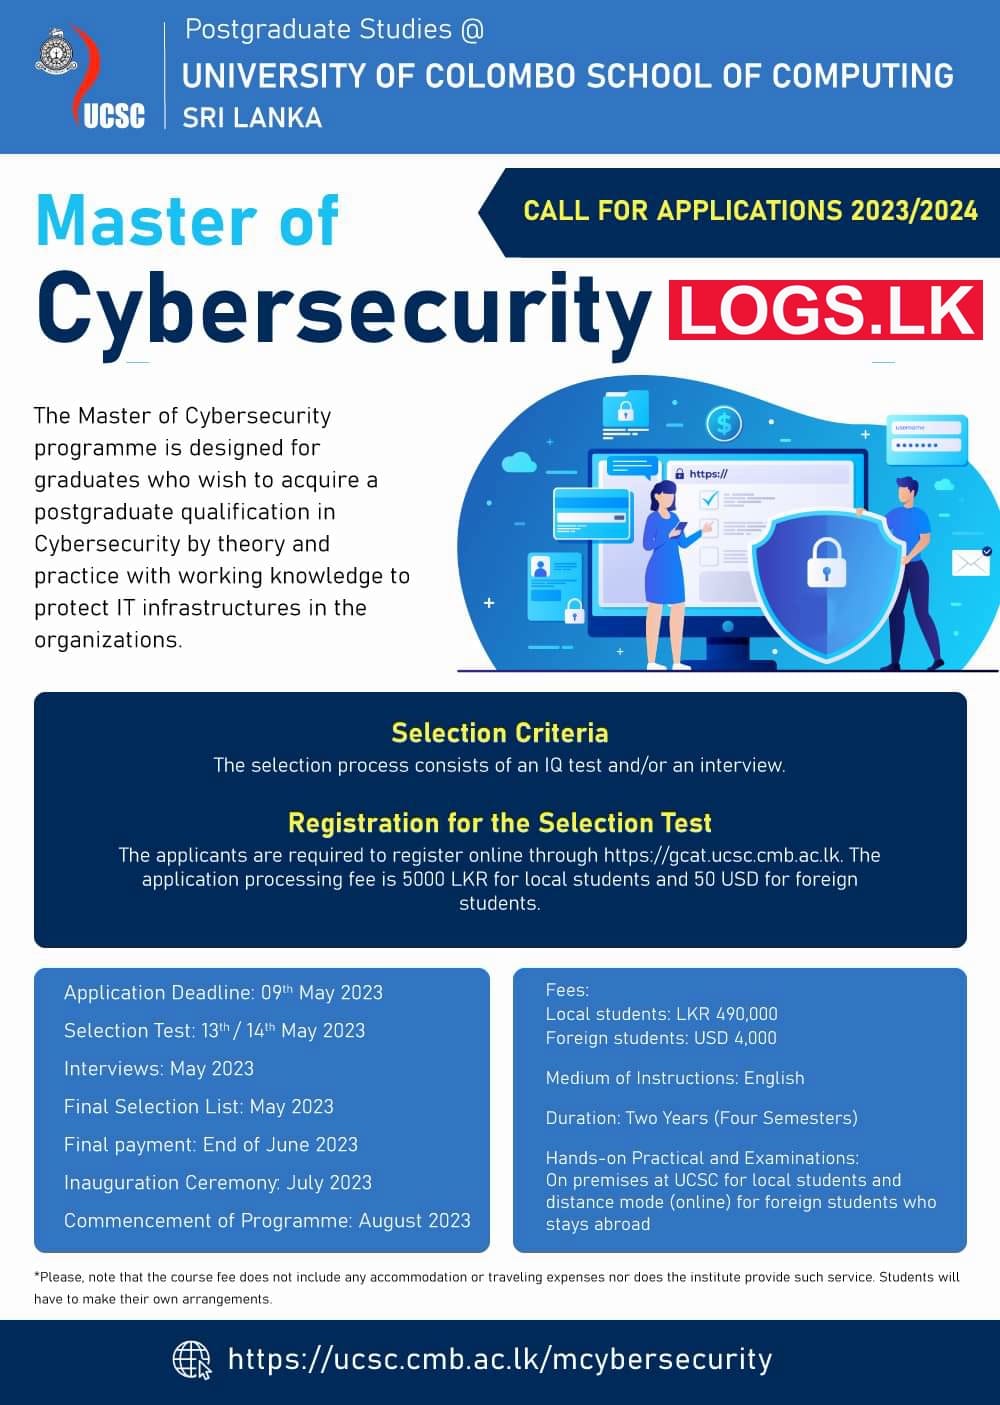 Master of Cyber Security Degree 2023 - University of Colombo School of Computing UCSC